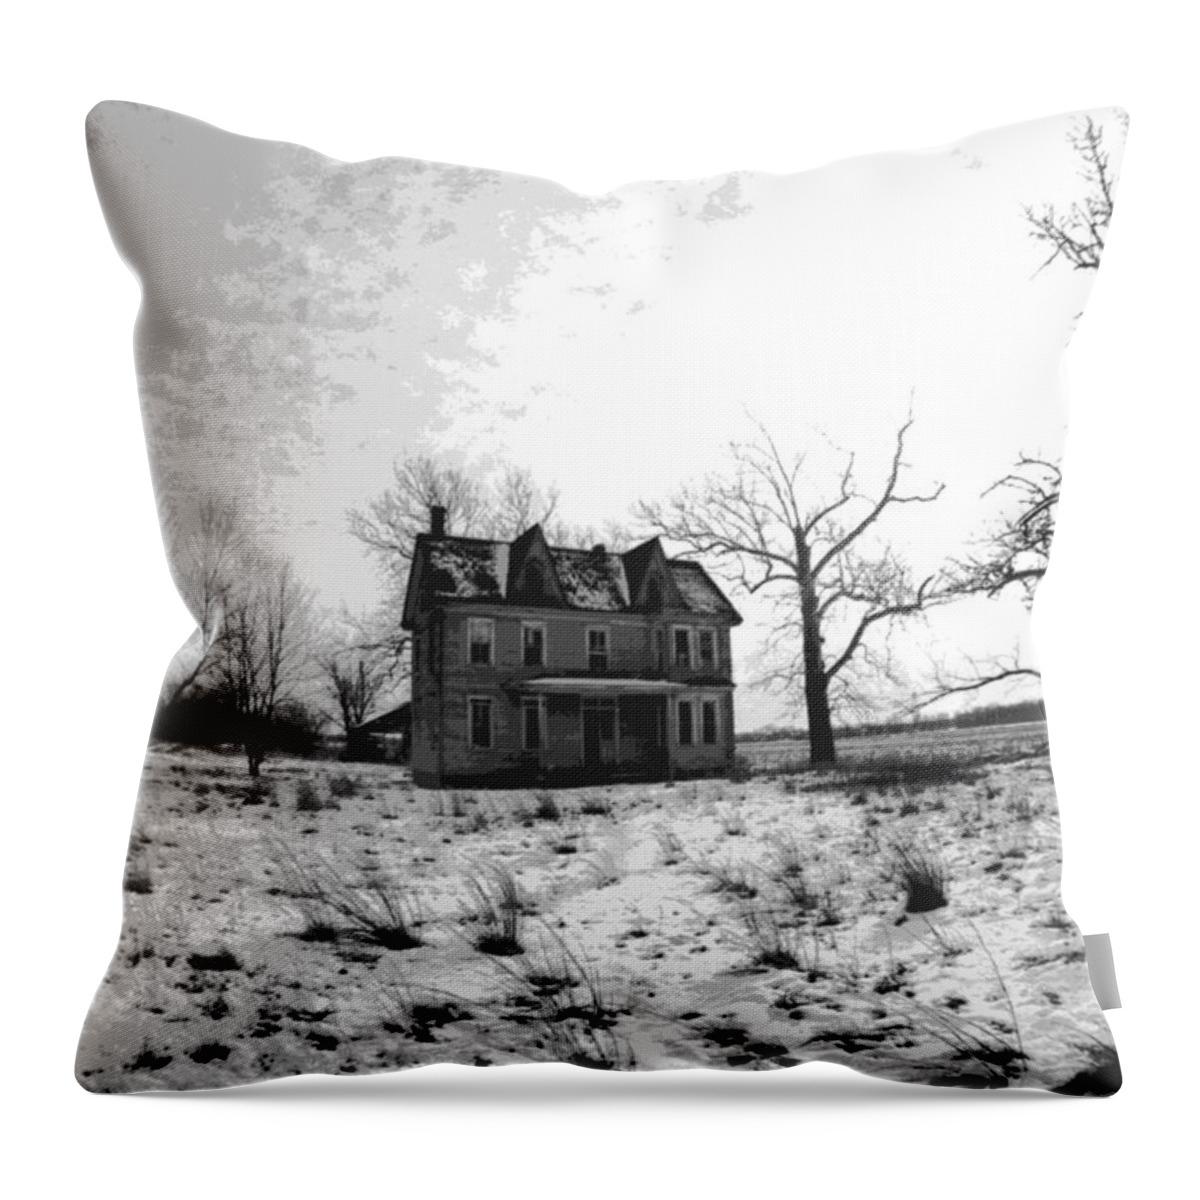 Haunted Throw Pillow featuring the photograph Haunted House by Steven Huszar